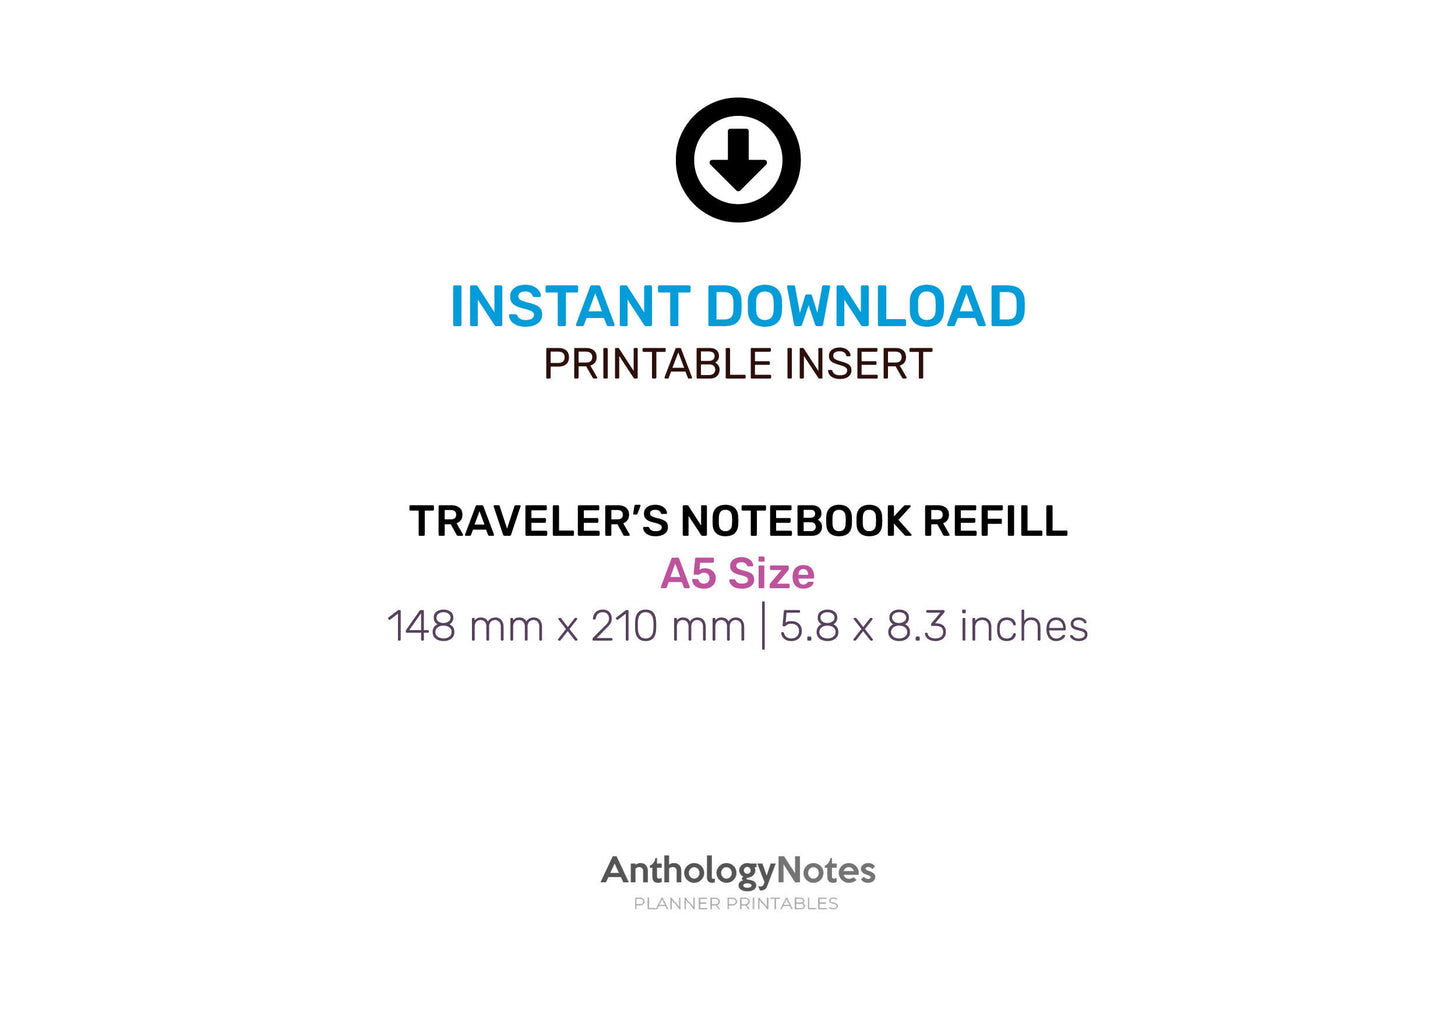 TN A5 WEEKDAY Warrior Vertical Printable Insert Refill for Traveler's Notebook Standard | Monday to Friday Only